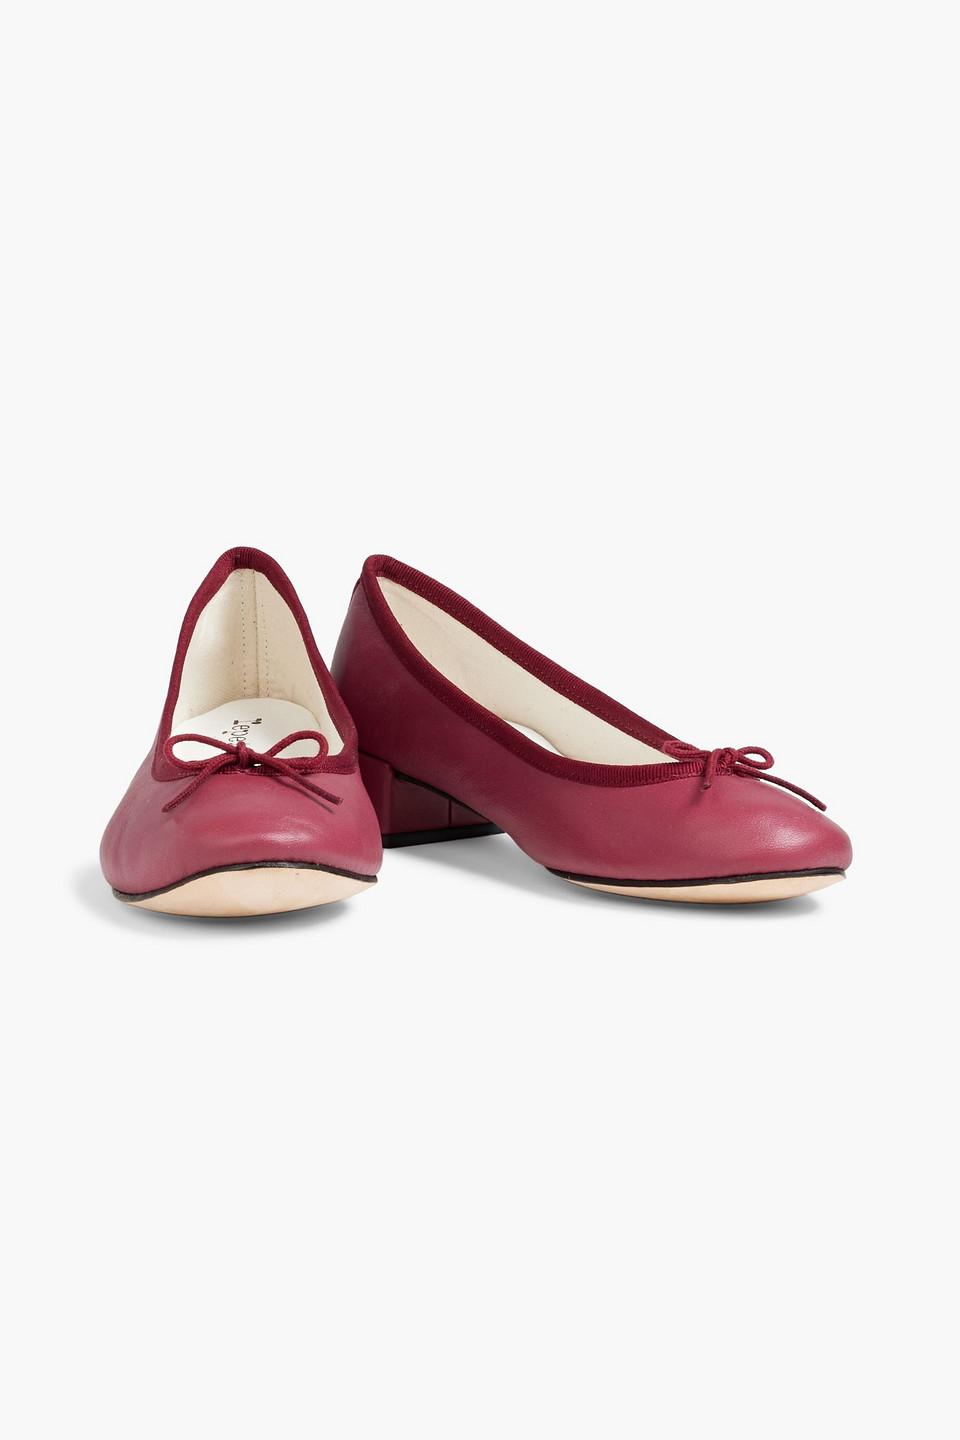 Repetto Red Camille Heels